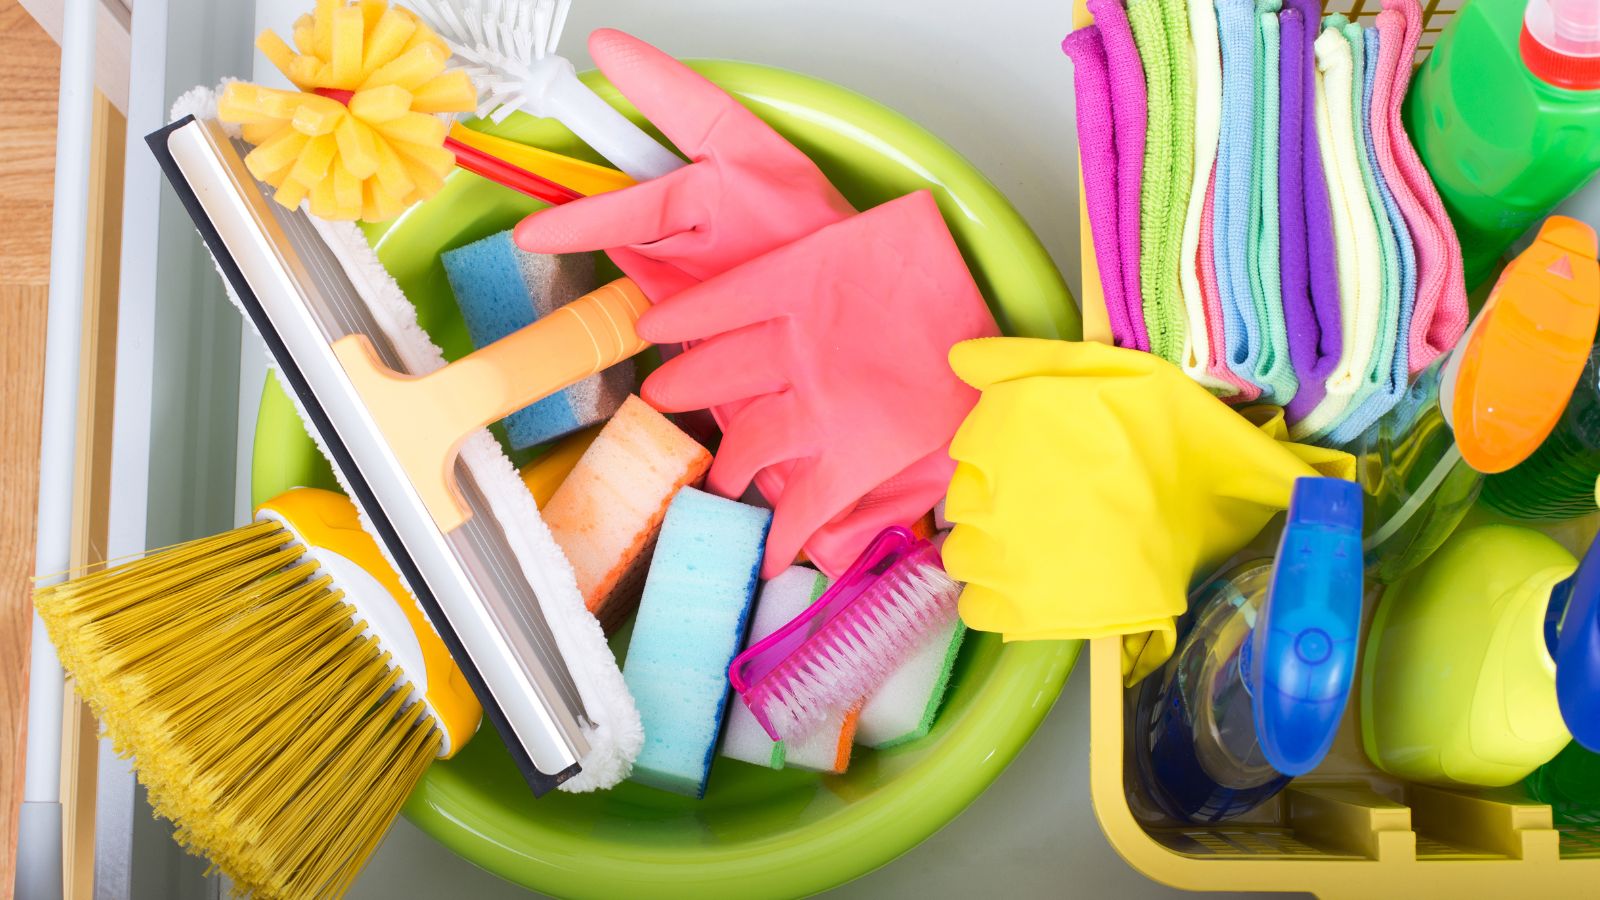 <p>All cleaning supplies do the same thing, regardless of how much they cost. When it comes to cleaning products, with more expensive products, you're purely paying for the brand name. To save even more money, you can try bulk buying generic brands or even making your own cleaning supplies.</p>